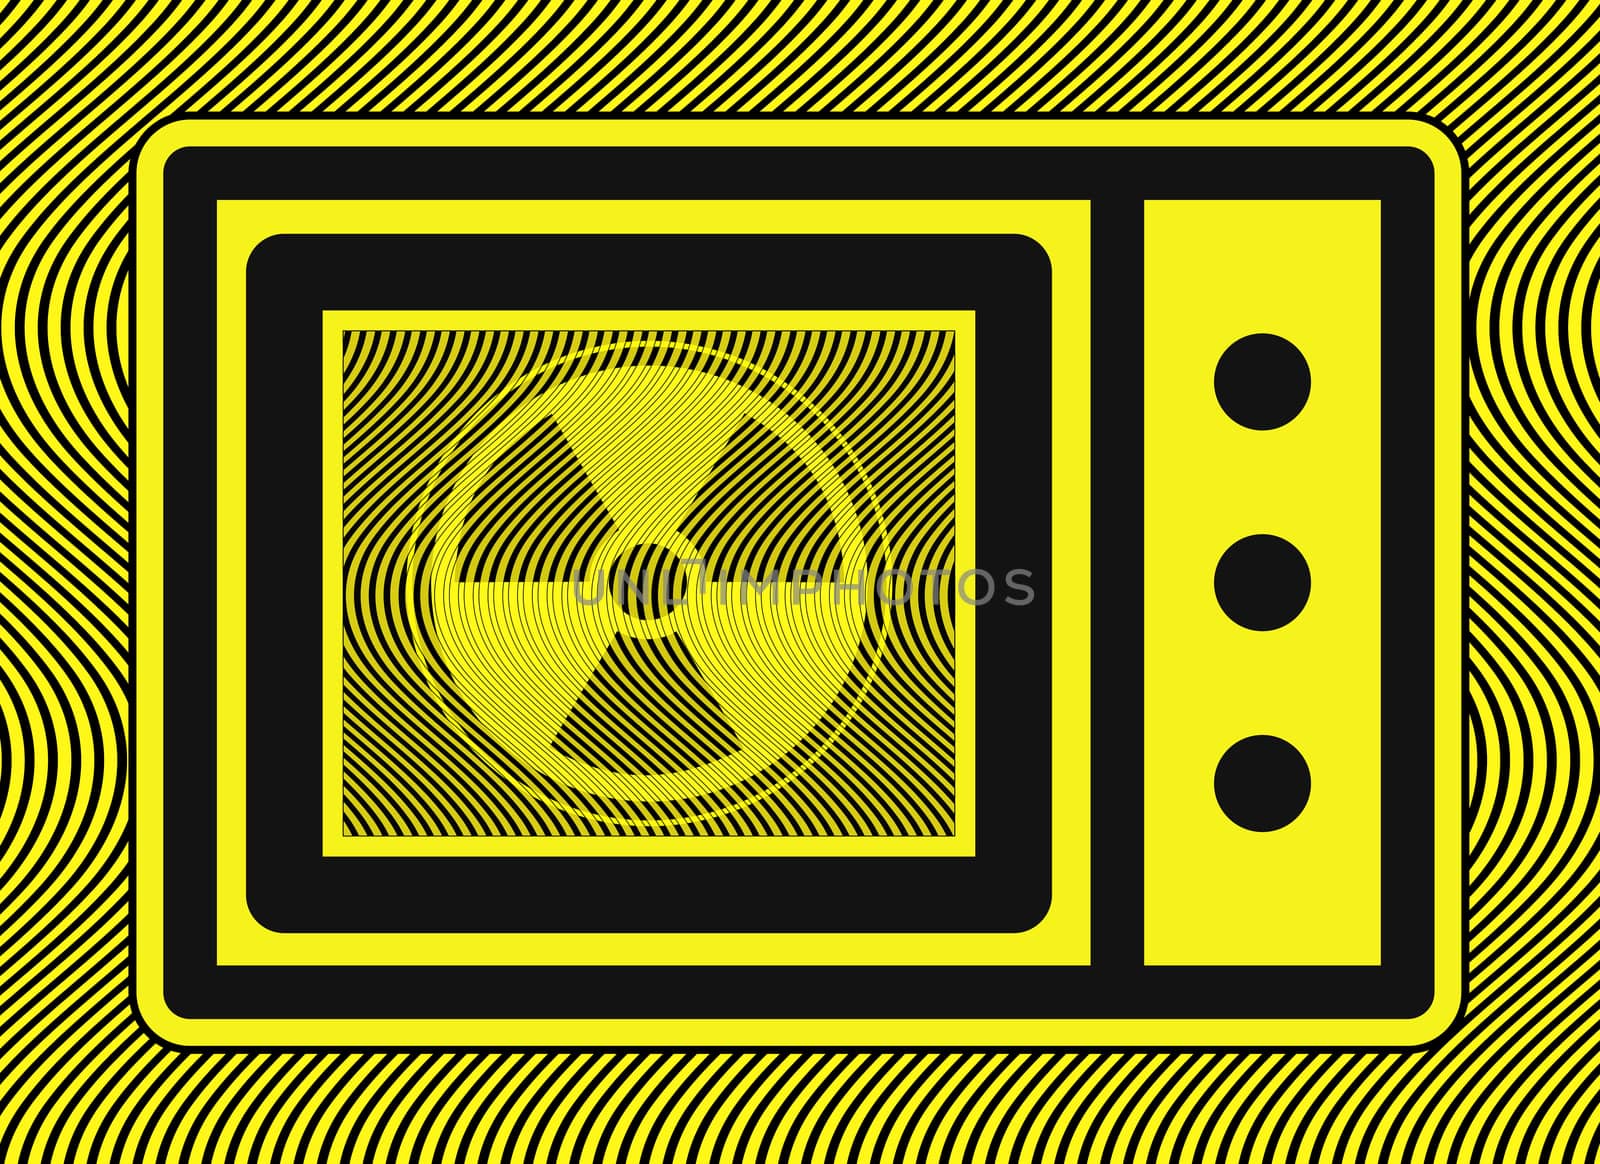 The exposure to microwave radiation leakage may be harmful to human health